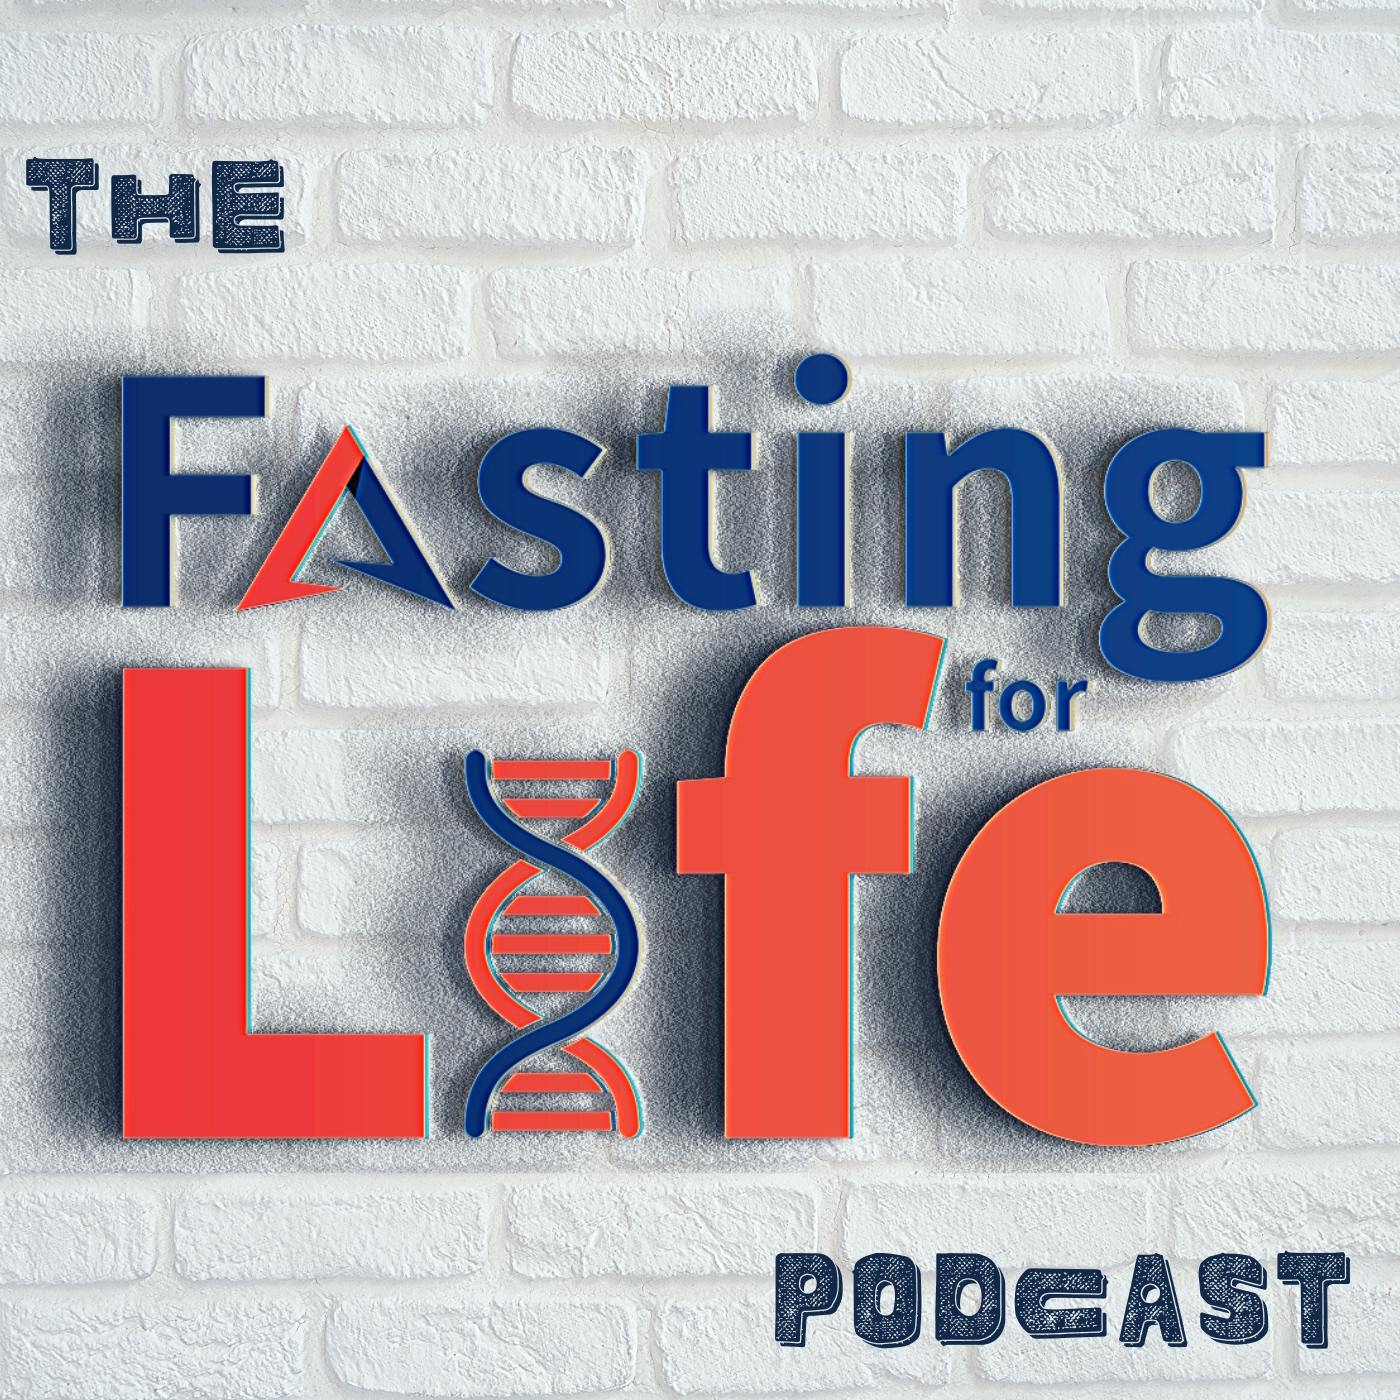 Ep. 165 - Do higher ketones help you lose weight & reduce hunger? | Should you eat low carb while fasting? | Effects of different eating styles on leptin & ghrelin hunger hormones | Free Intermittent 